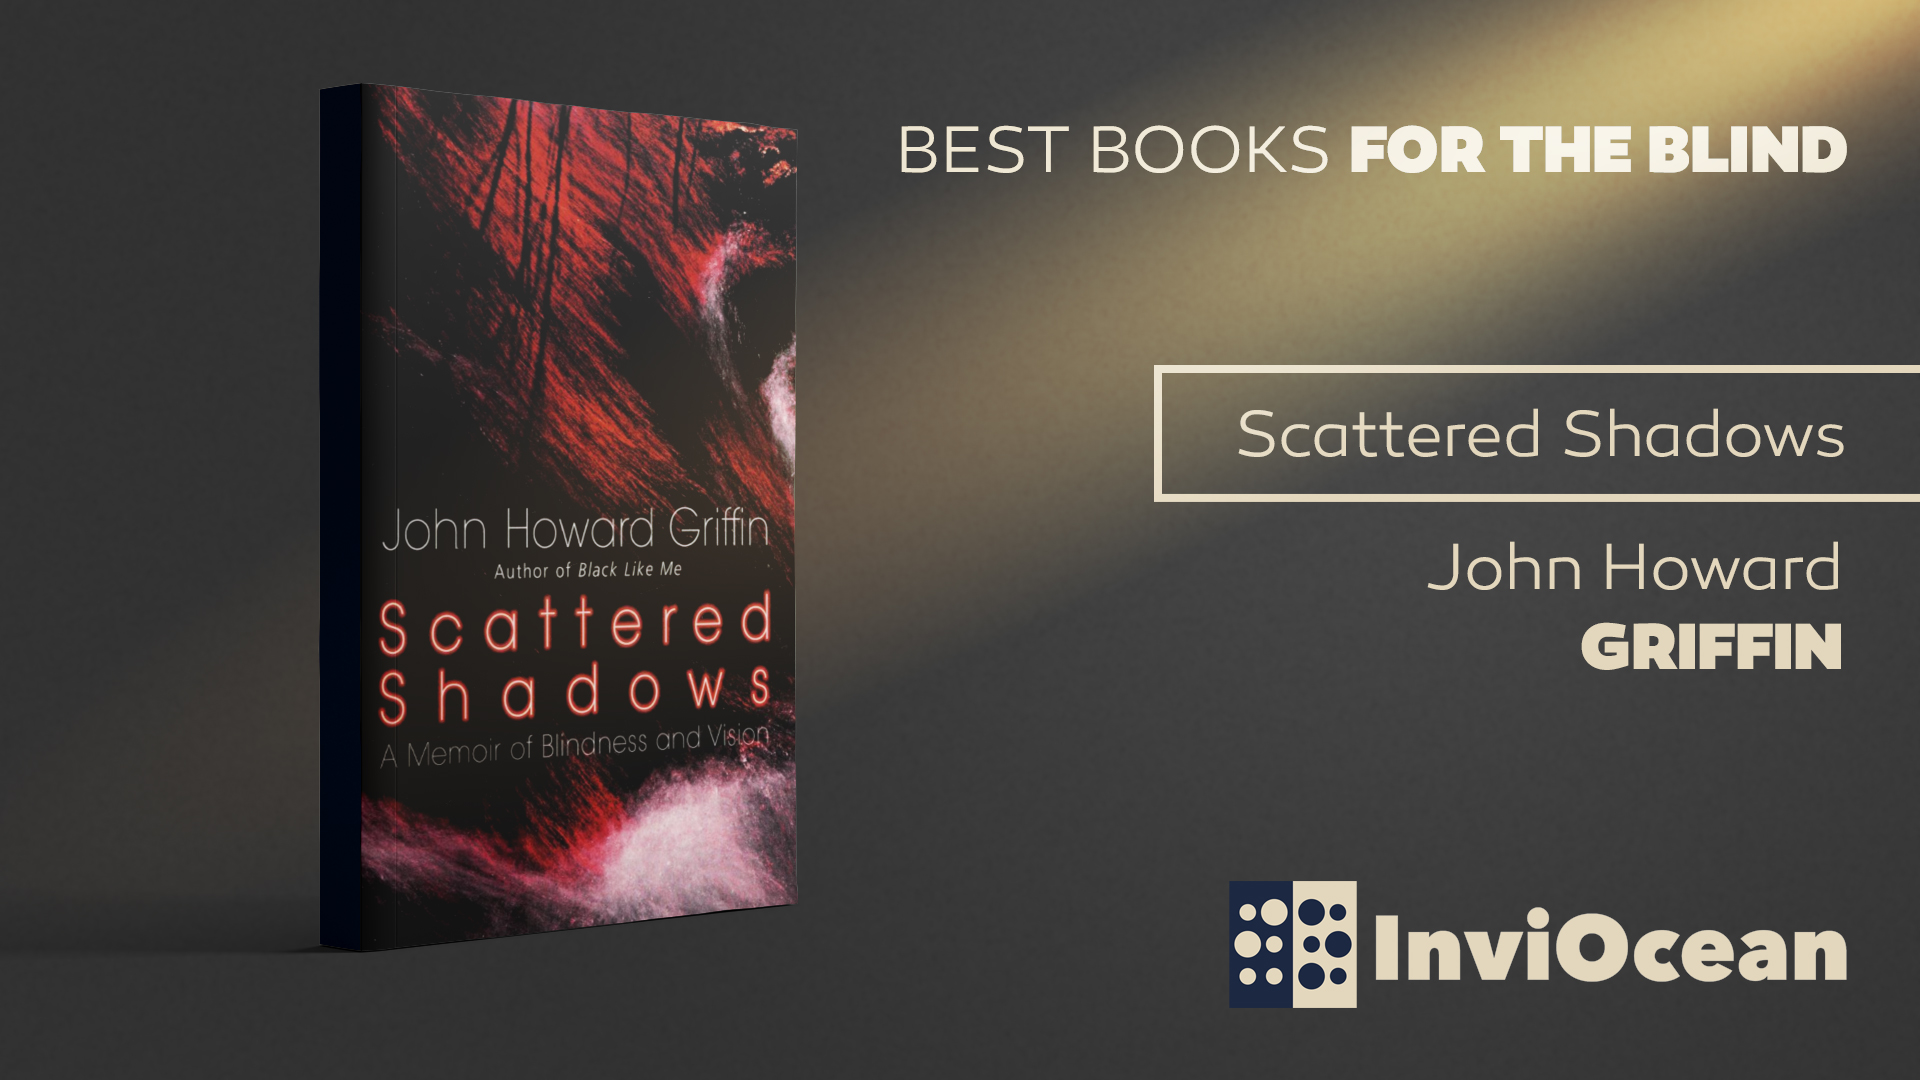 Scattered Shadows by John Howard Griffin